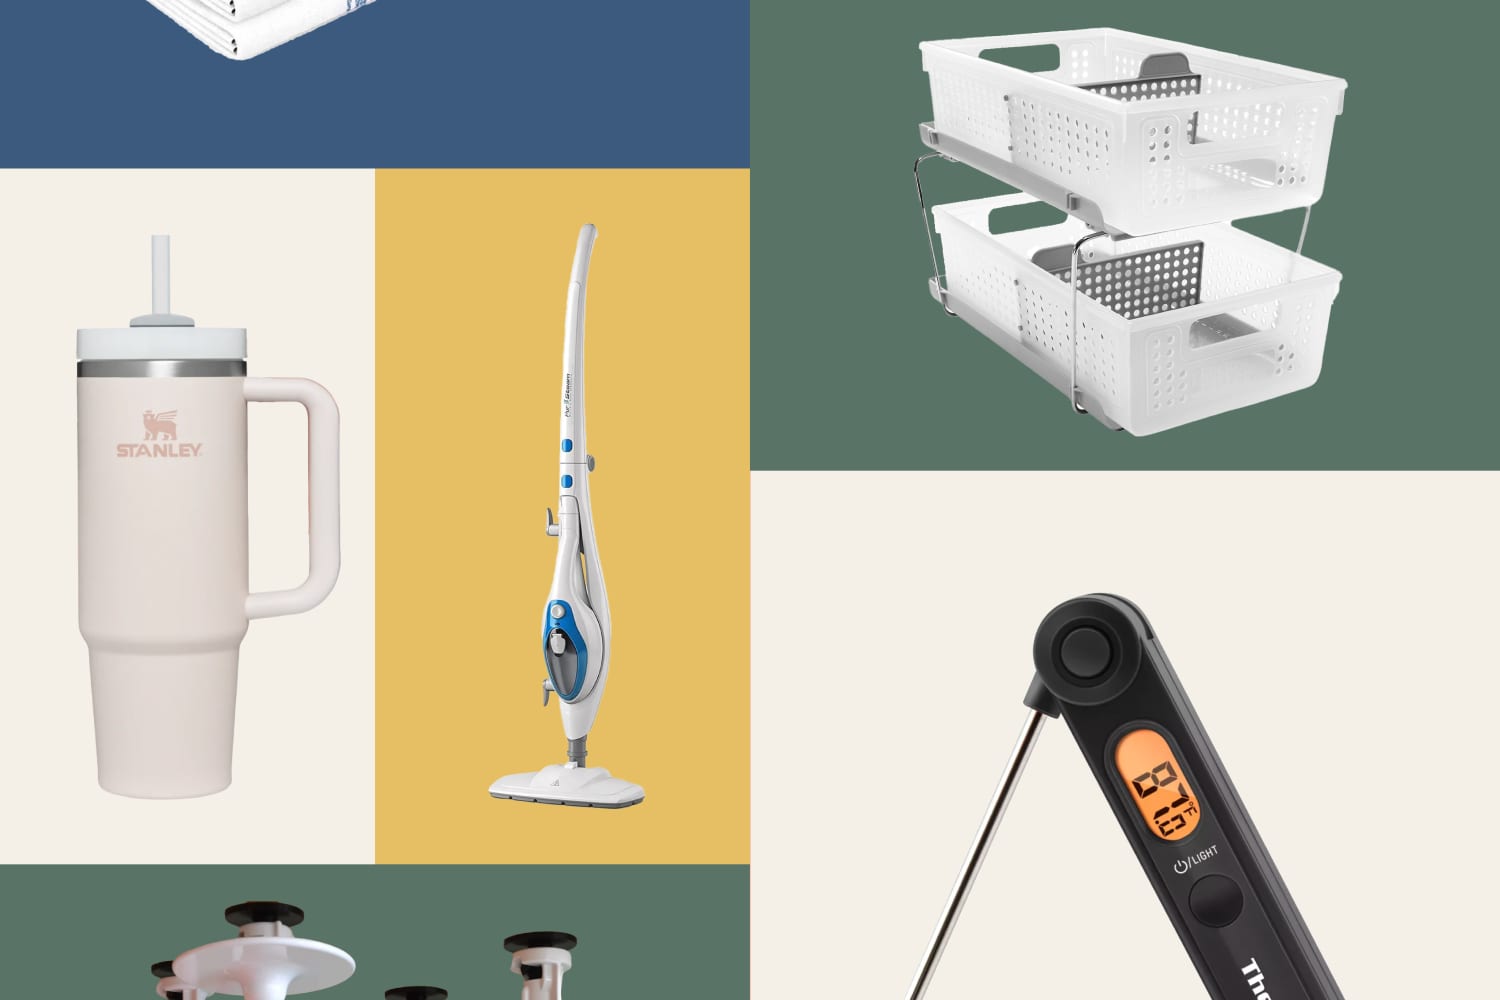 Best-Selling Kitchen Products Readers Bought in 2022